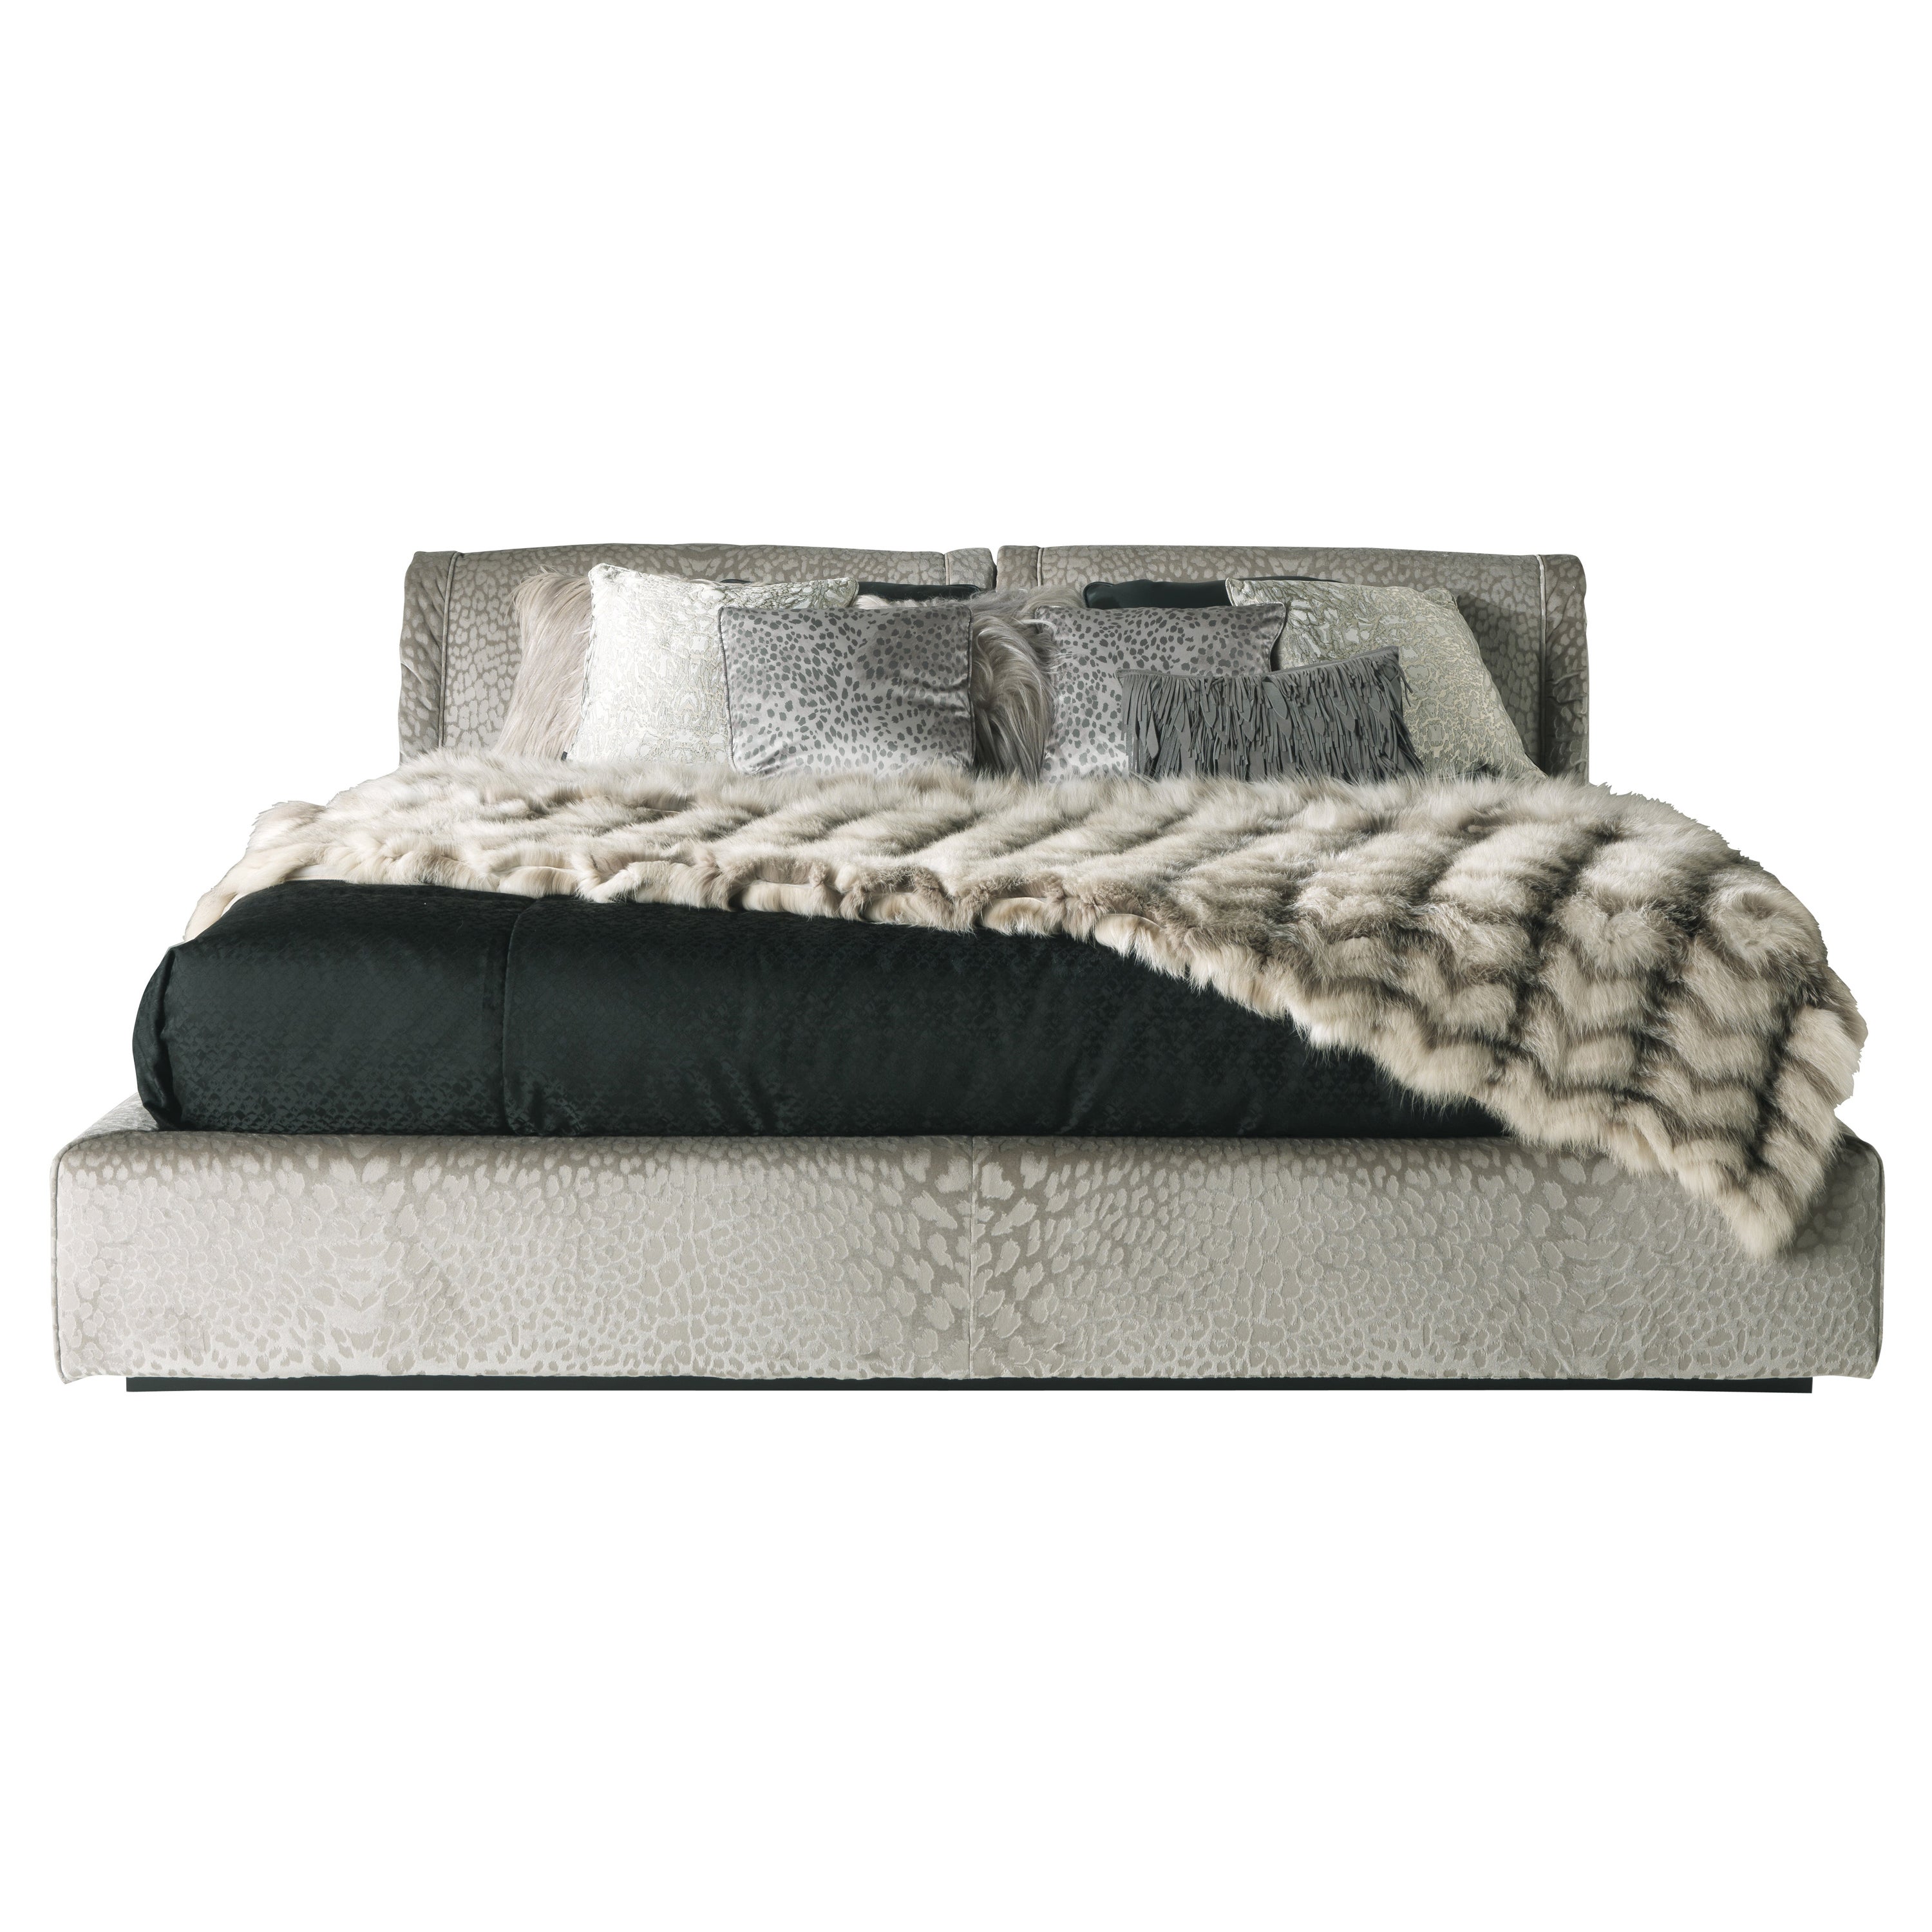 21st Century Smoking Bed in Fabric by Roberto Cavalli Home Interiors For Sale